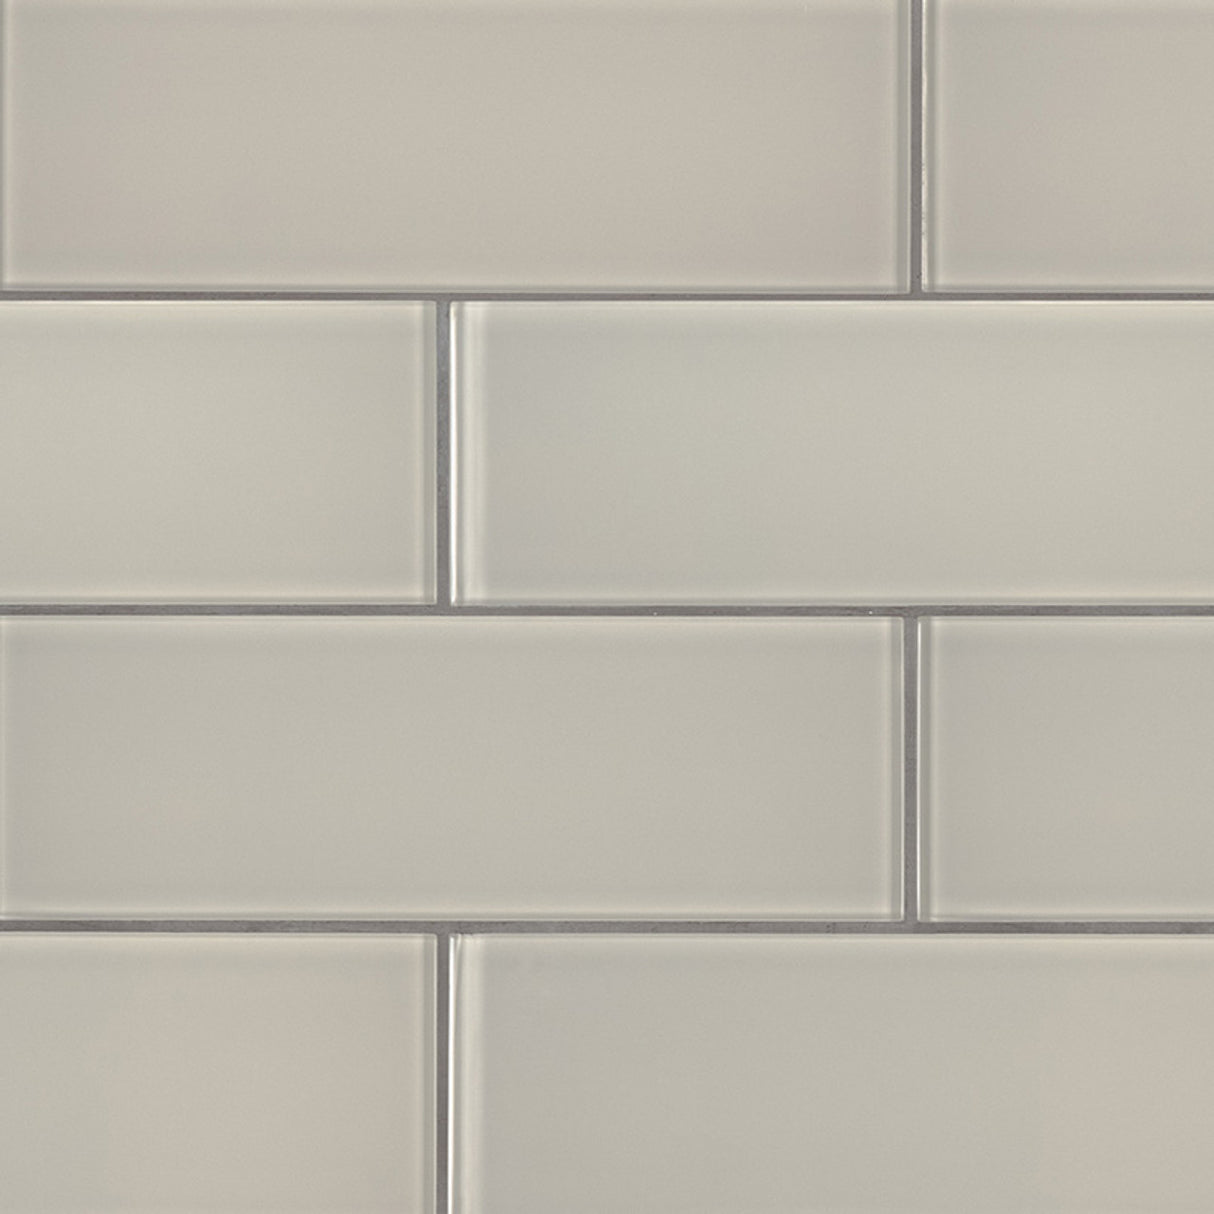 Snow cap white 3x9 glass wall tile  msi collection SMOT-GL-T-SNWHT39 product shot angle view